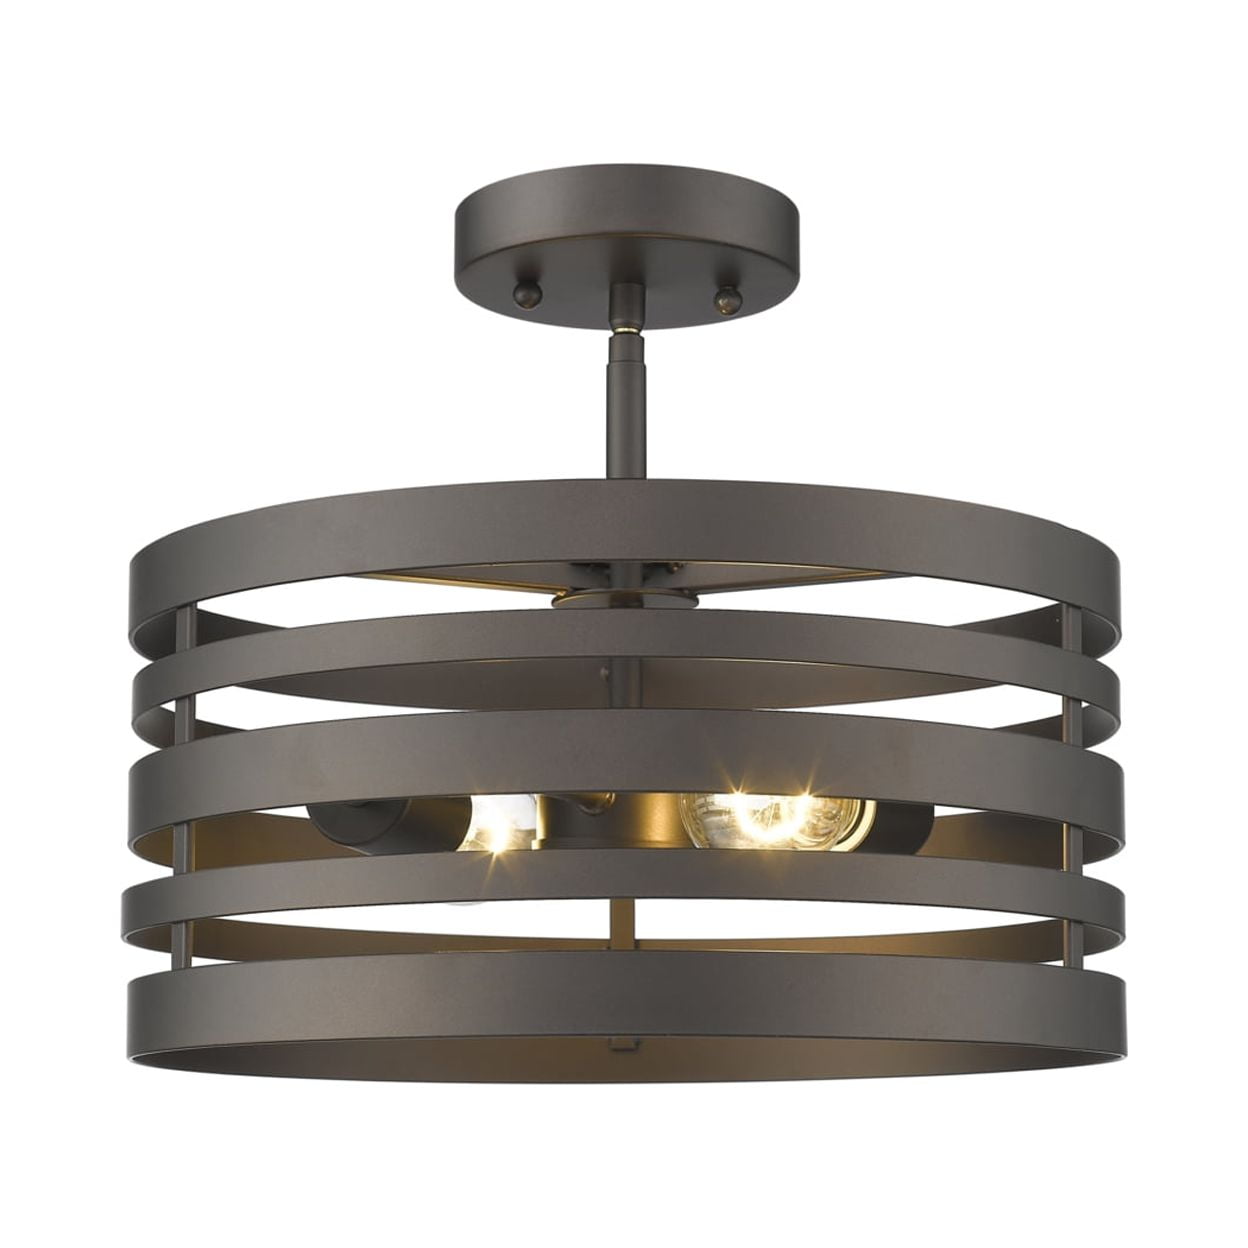 Picture of Chloe Lighting CH2H122RB13-SF2 Paisley Farmhouse 2 Light Rubbed Bronze Semi-Flush Ceiling Fixture - 13 in.